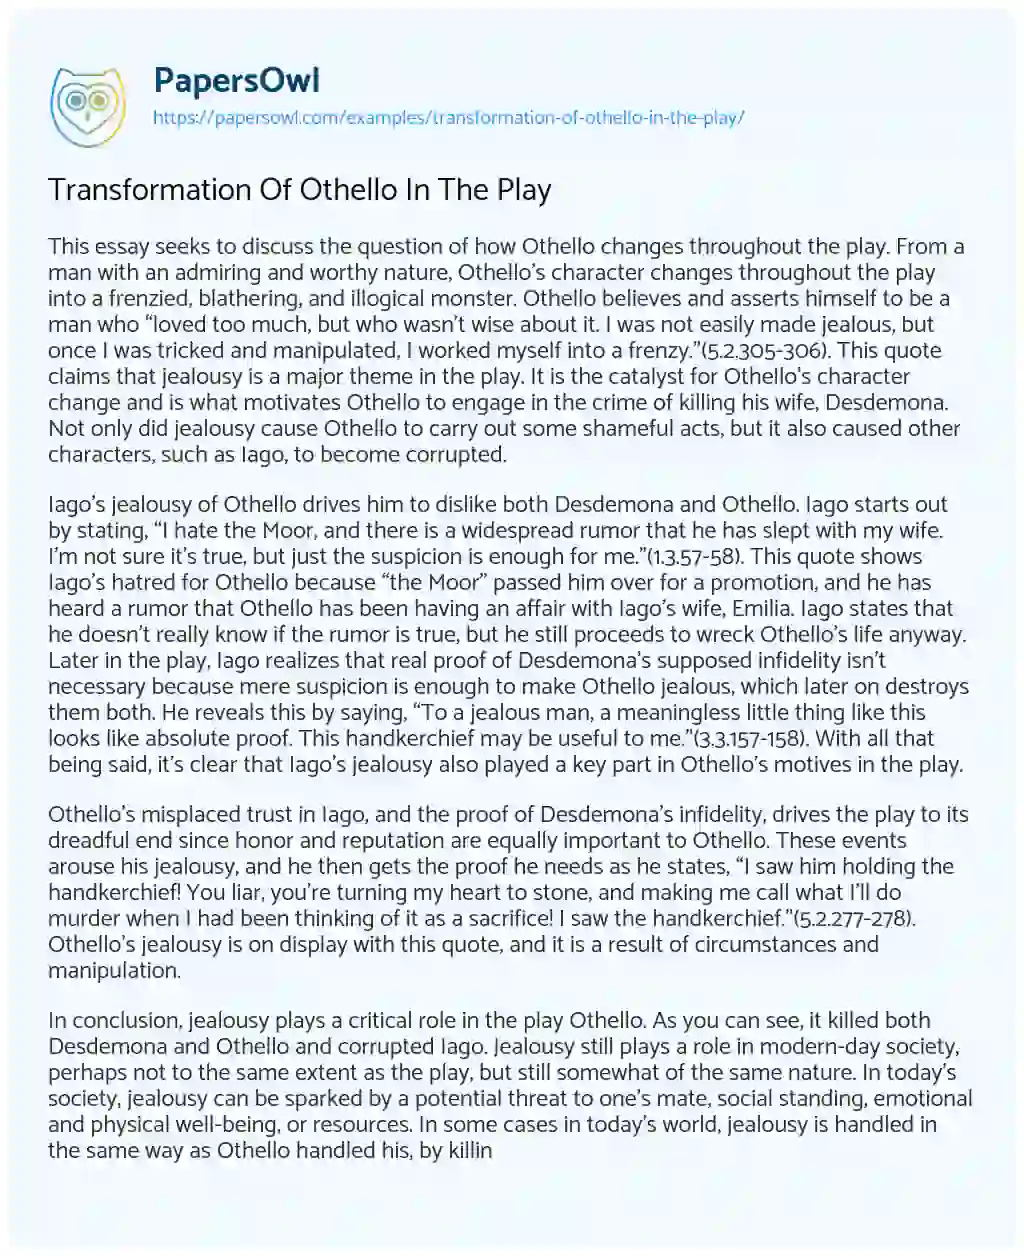 Essay on Transformation of Othello in the Play